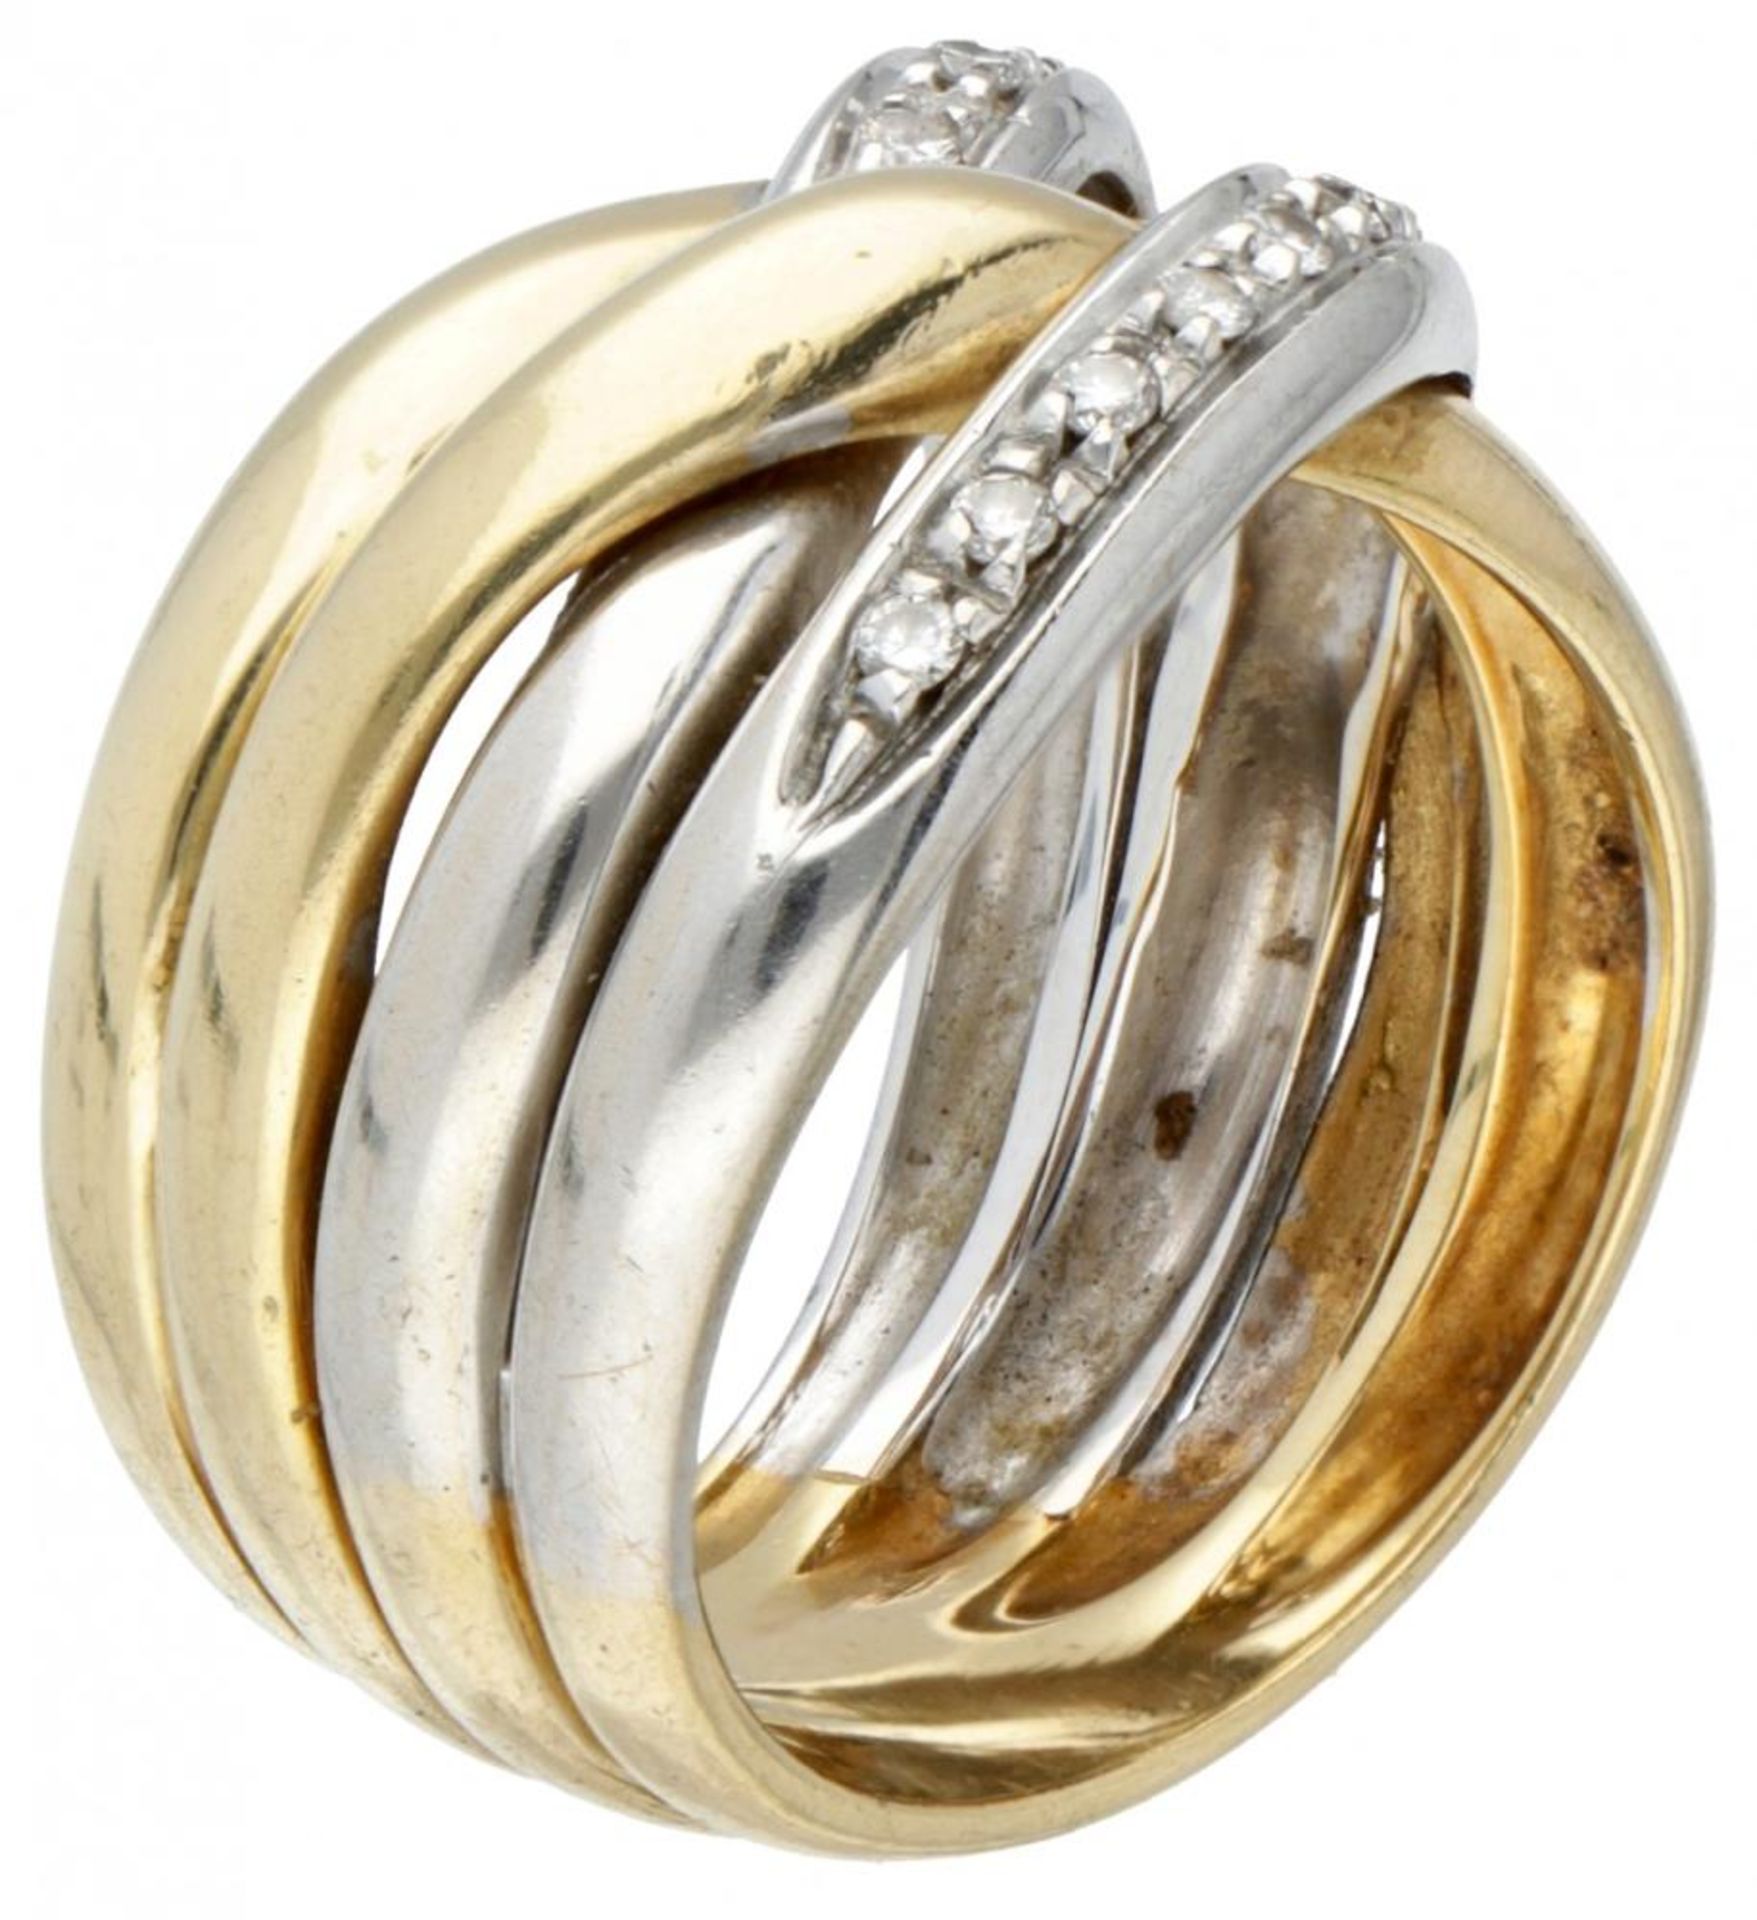 18K. Bicolor gold braided ring set with approx. 0.16 ct diamond. - Image 2 of 2